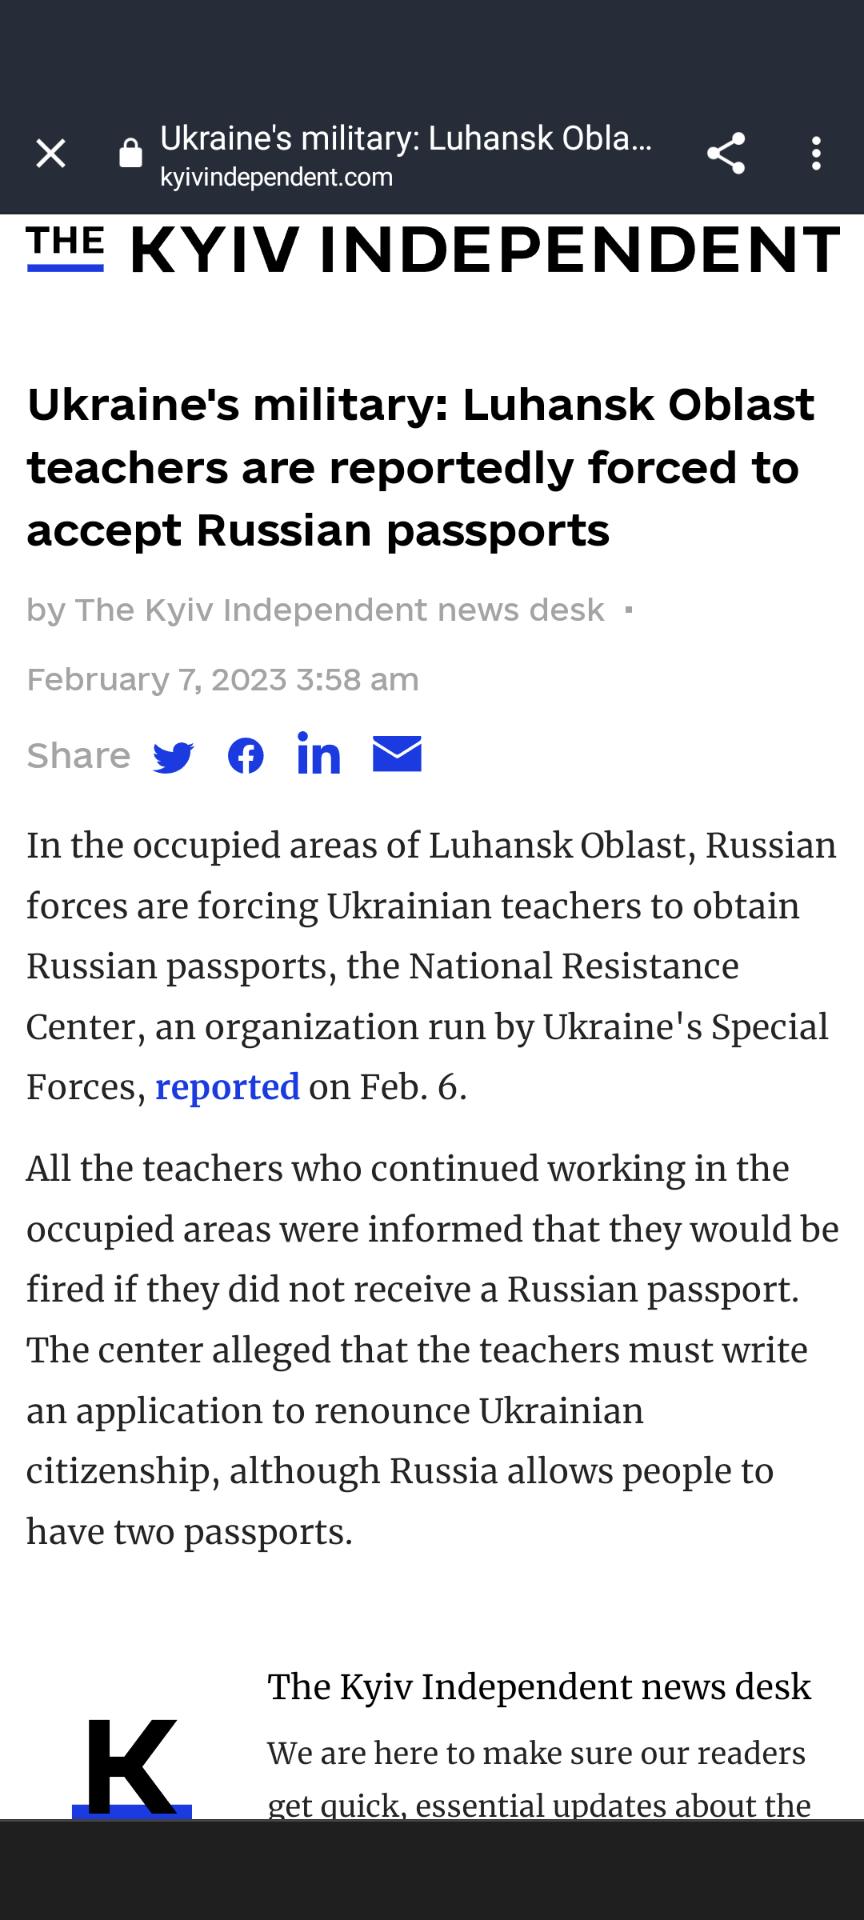 Ukraine’s military: Luhansk Oblast teachers are reportedly pressured to settle for Russian passports.